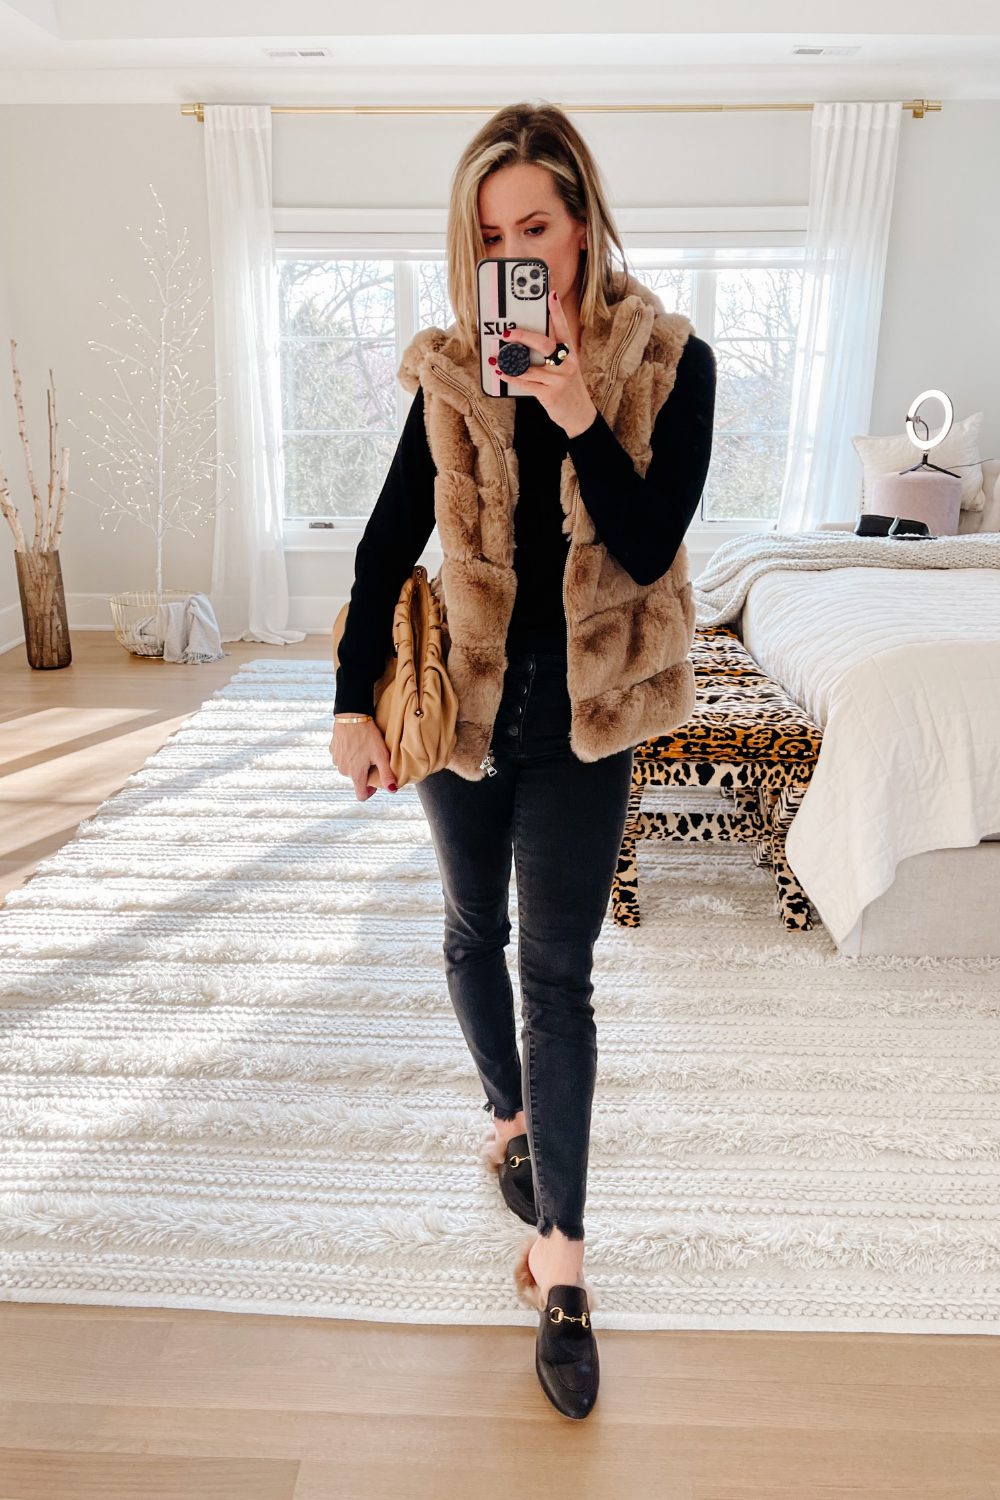 Suzanne wearing a black long sleeve tee, black denim, a fur vest, clutch ad loafers